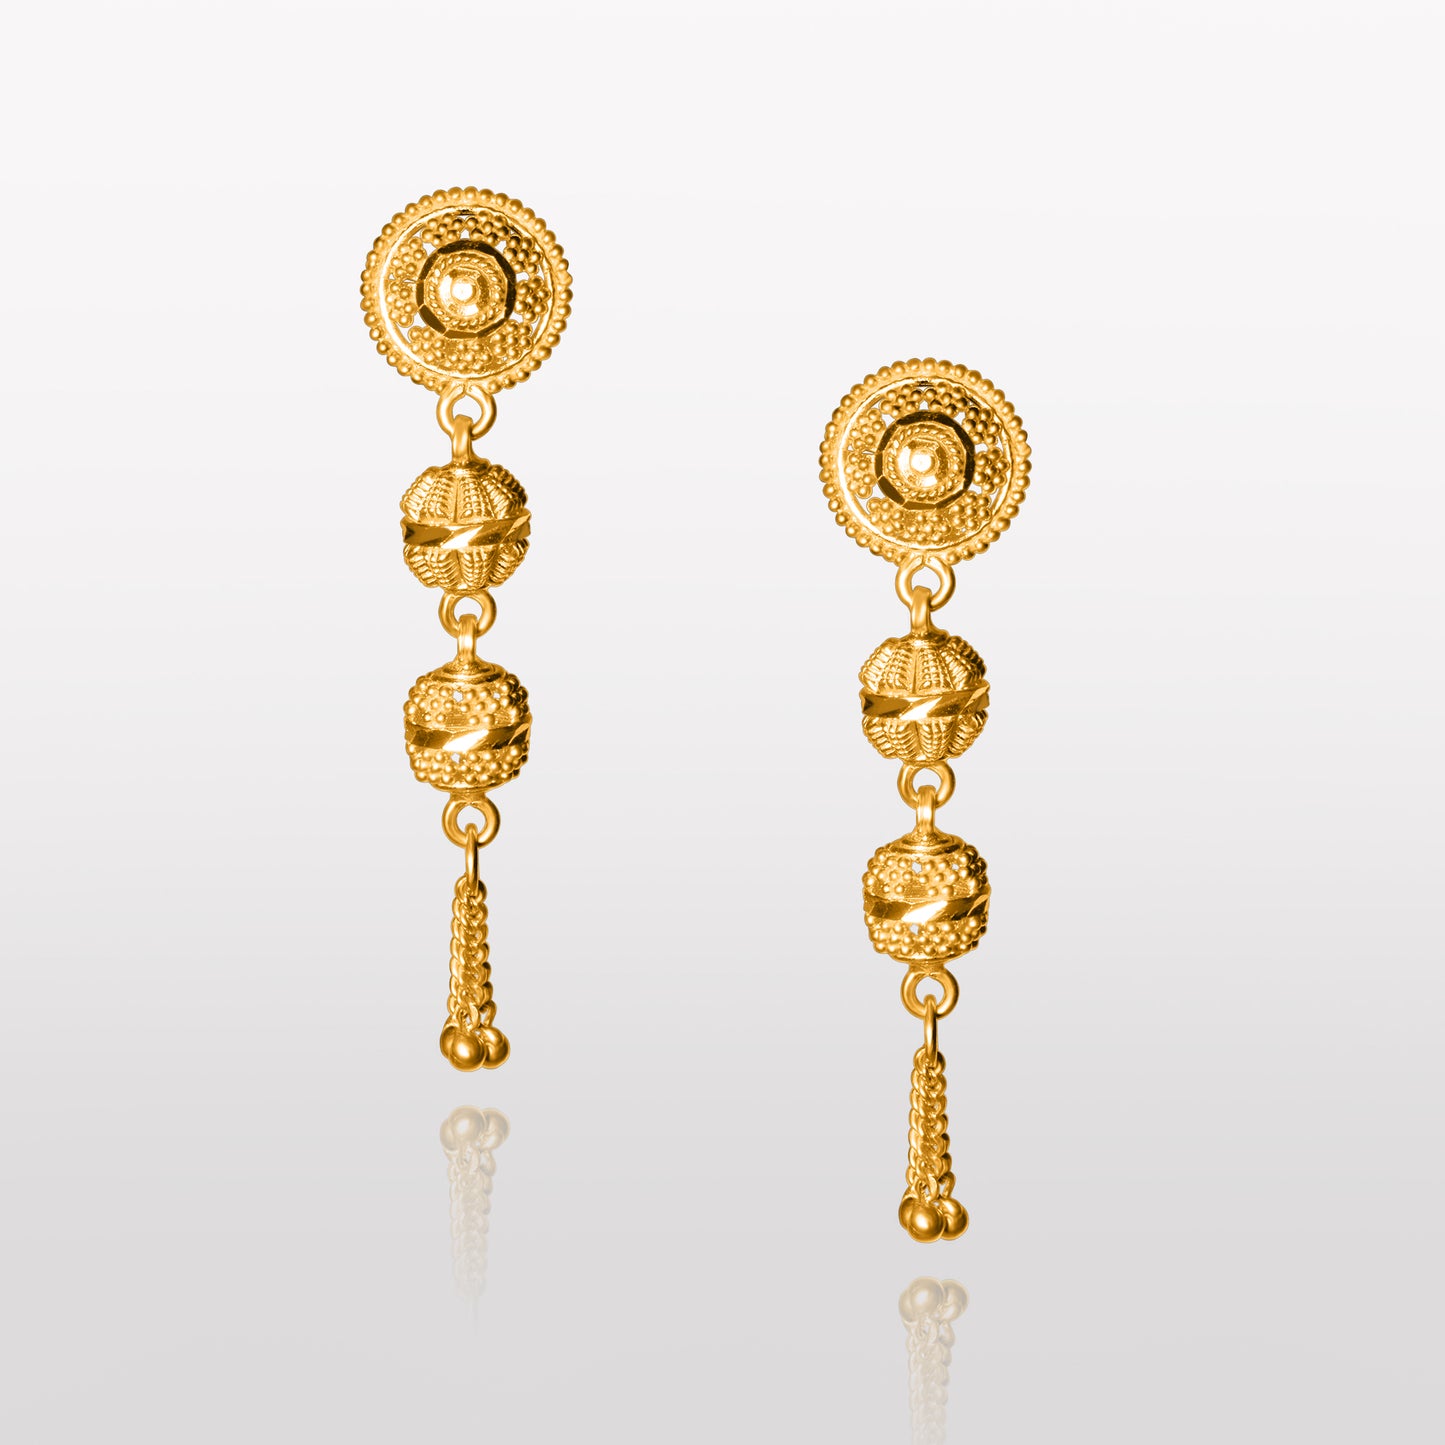 <img src="aria-mini-stud-earrings.jpg" alt="Aria Mini Stud Earrings in 22k Gold - a close-up view of exquisitely crafted stud earrings in 22k gold, featuring a beautiful and intricate design that exudes elegance and sophistication, making them the perfect accessory for any occasion."/>